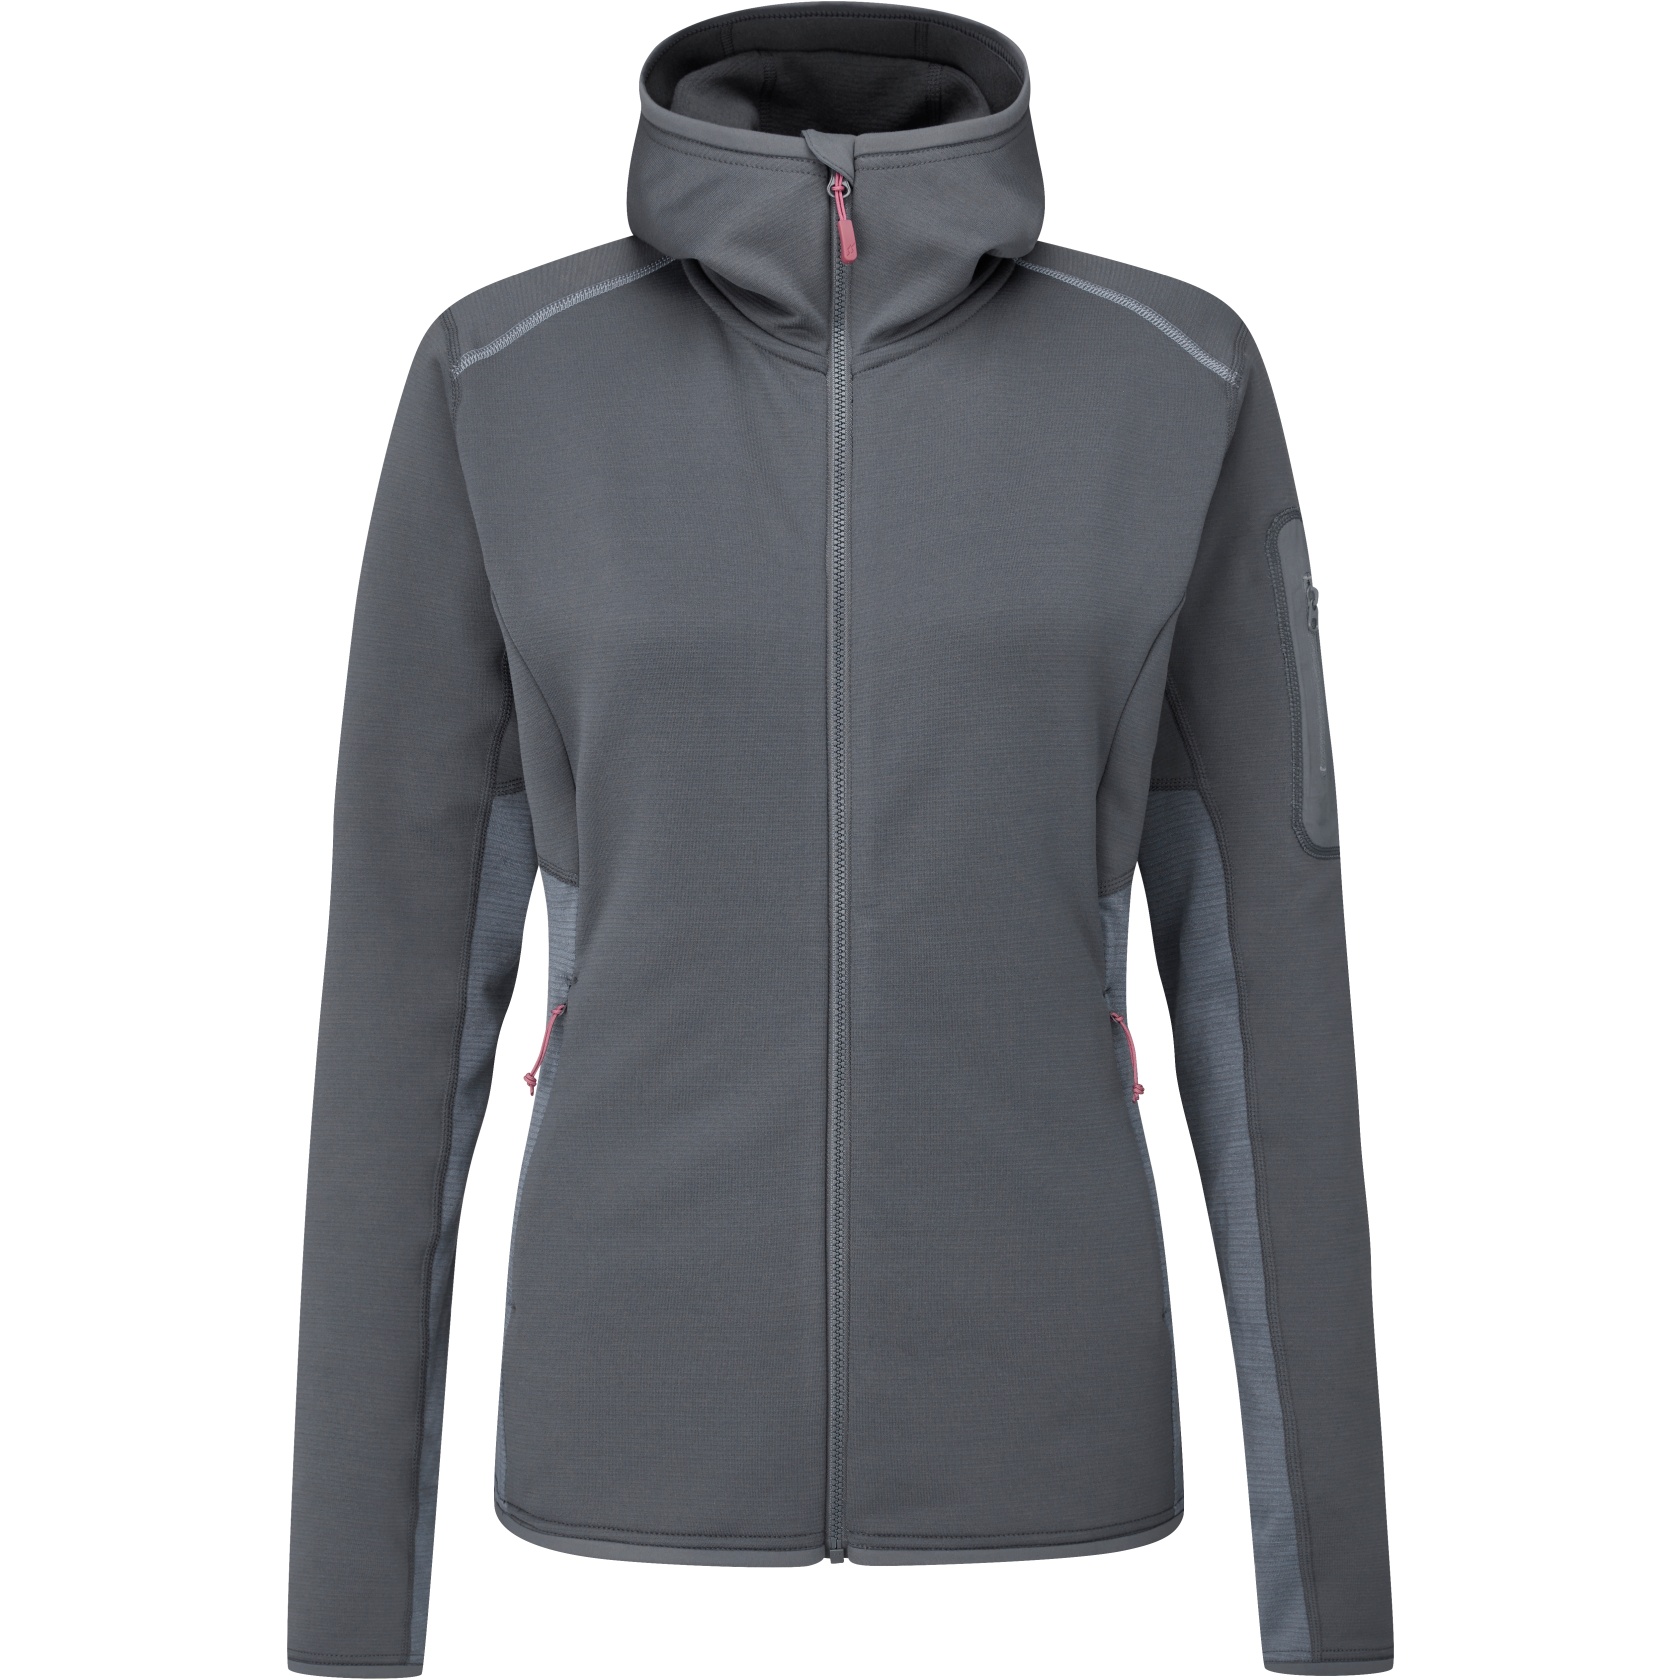 Picture of Rab Syncrino Mid Hoody Jacket Women - steel